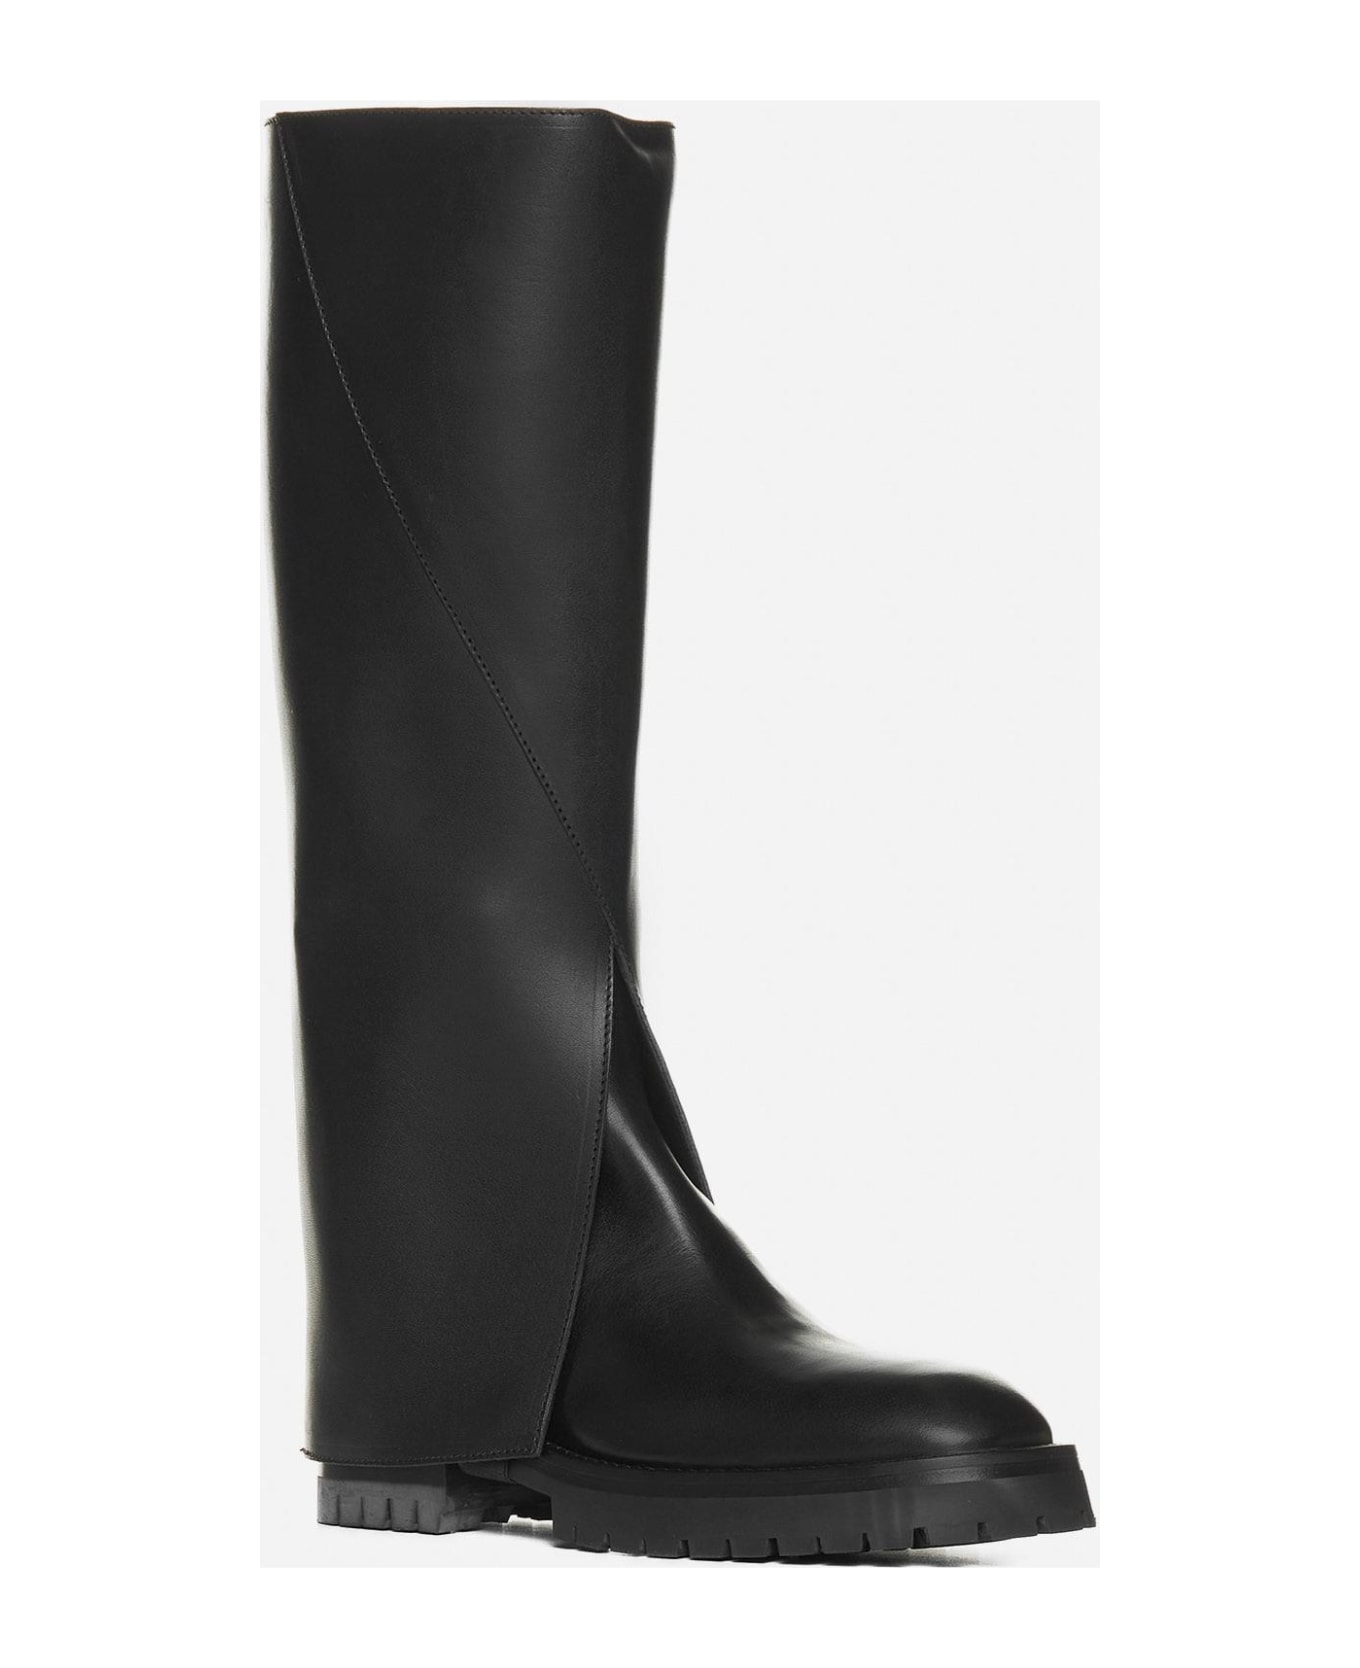 Ann Demeulemeester Jay Leather Boots - BLACK ブーツ